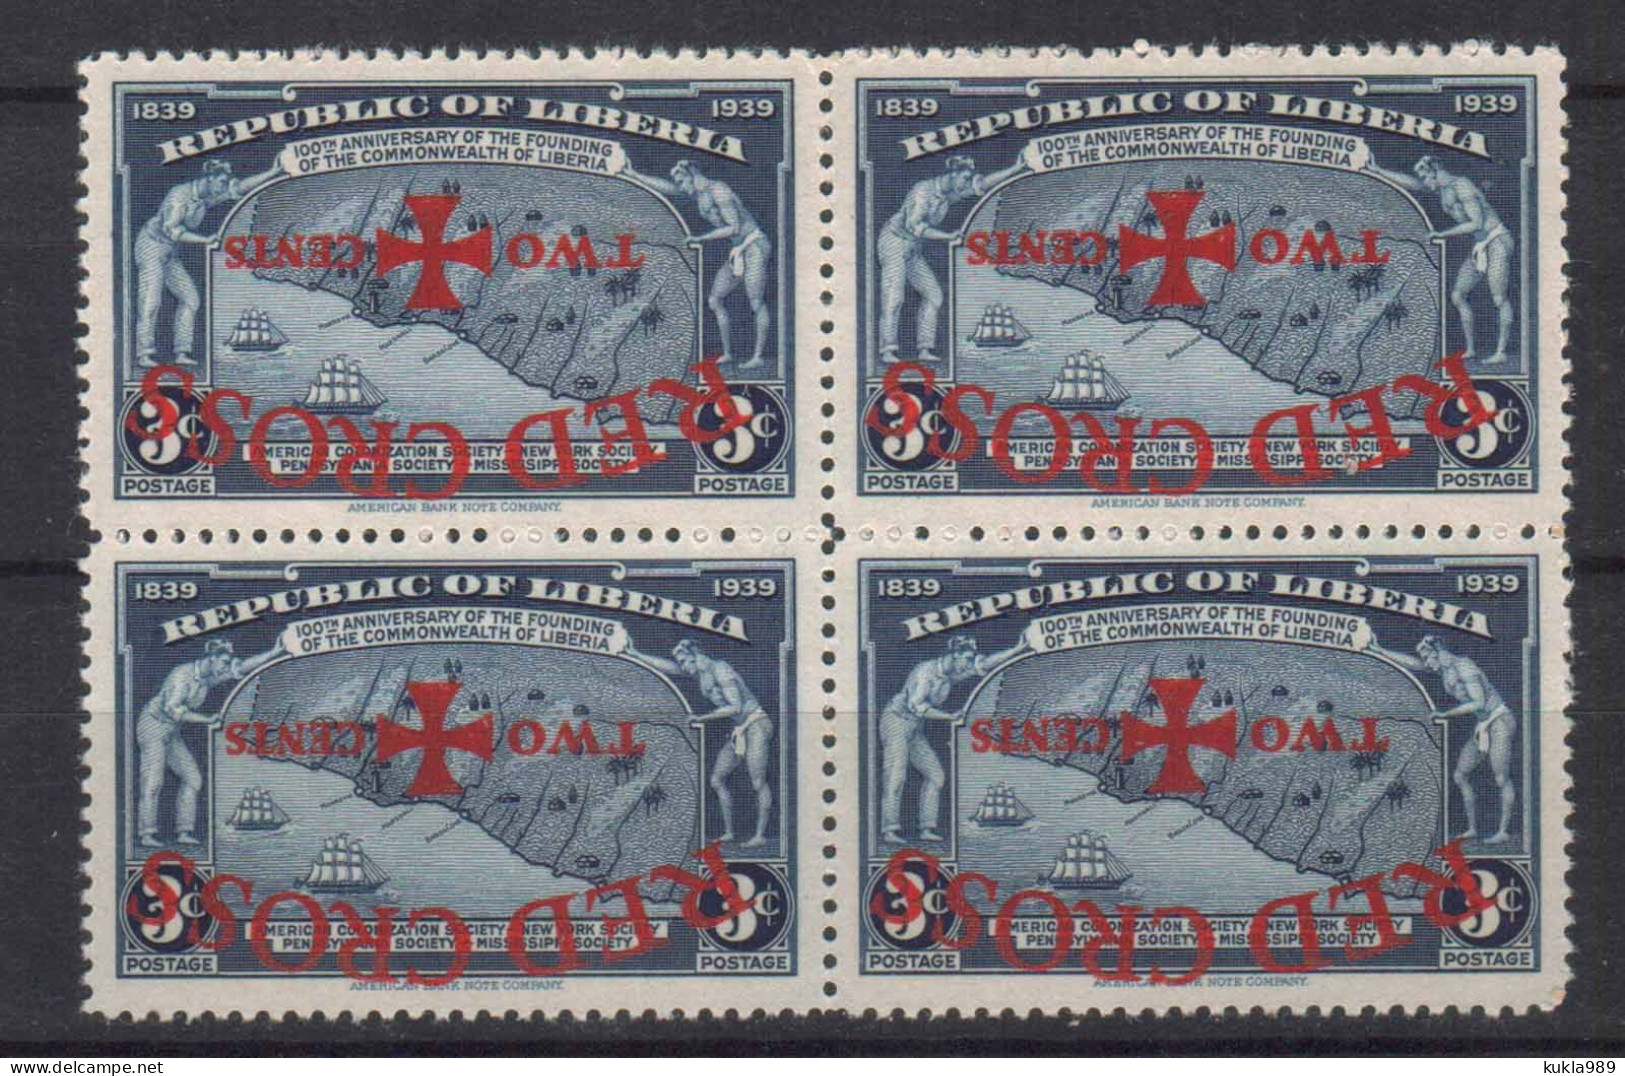 LIBERIA STAMPS 1941, RED CROSS OVP. INVERTED, MNH - Liberia